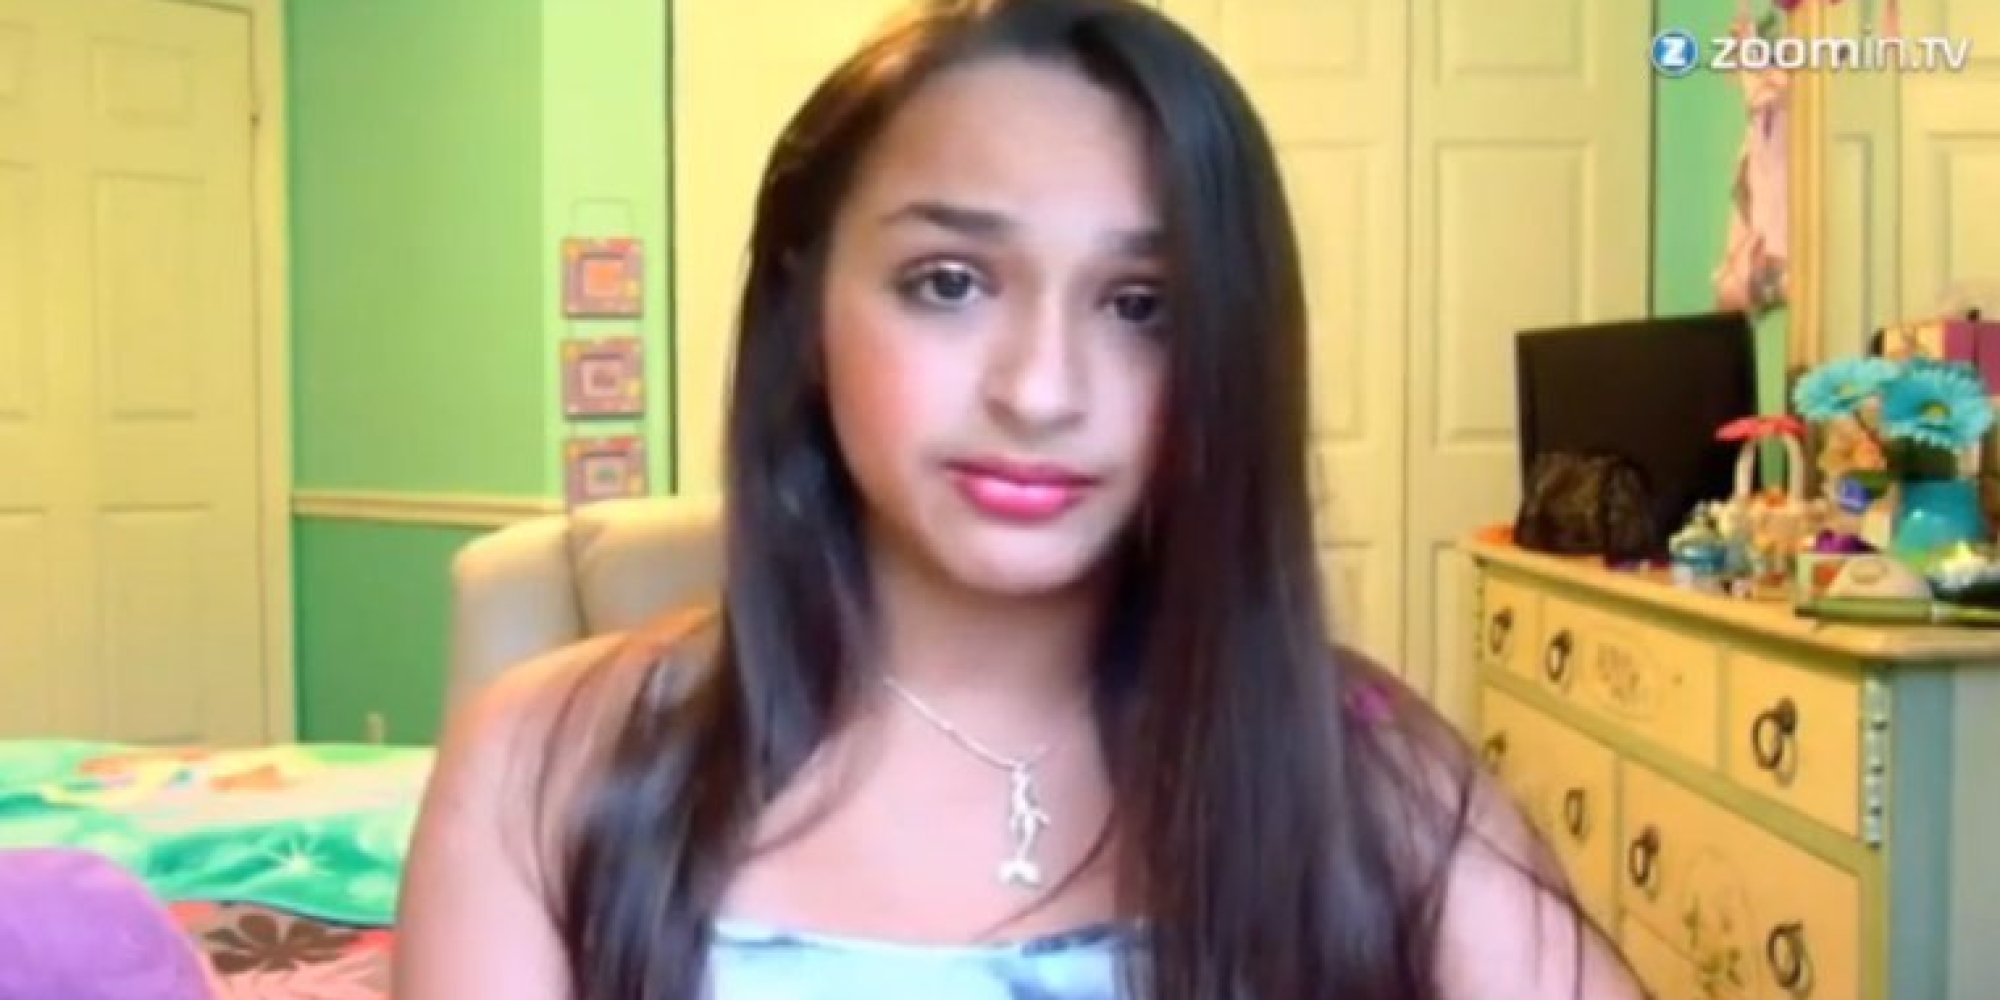 Brave 13 Year Old Transgender Girl Jazz Calls For Acceptance For All In Touching Video